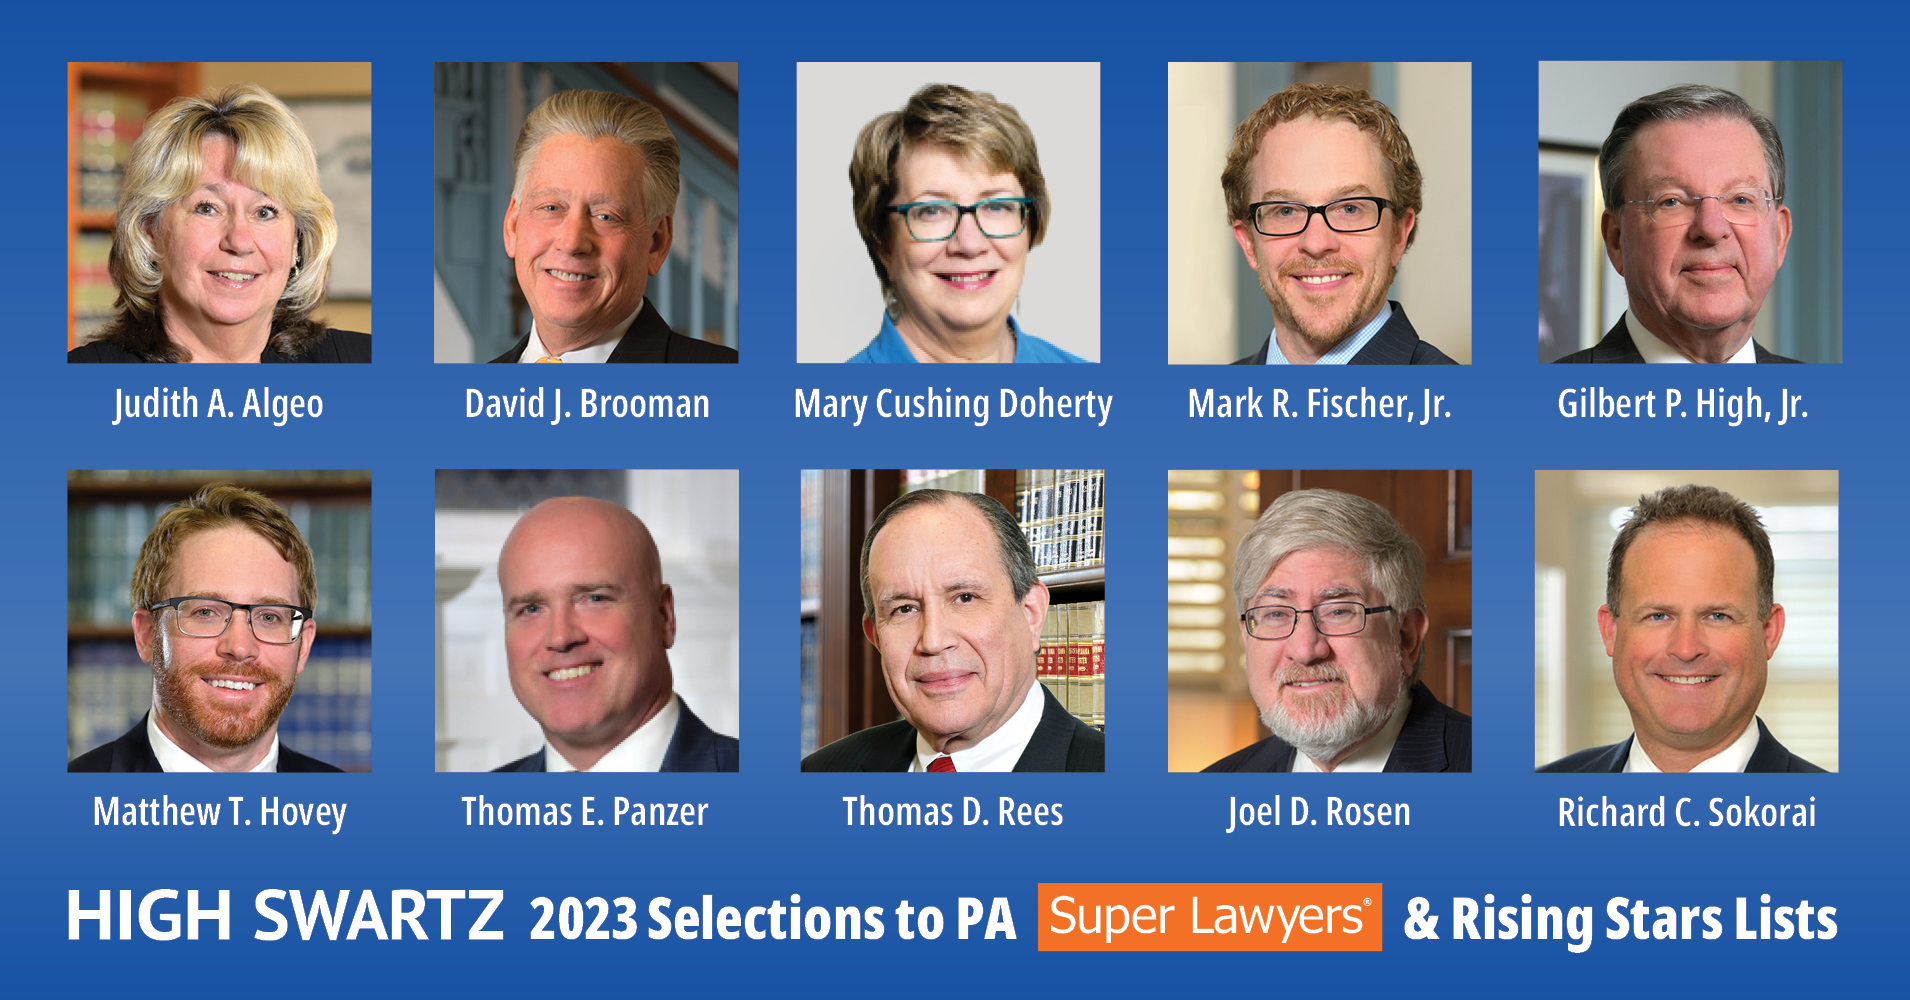 2023 pennsylvania super lawyers and rising stars list selections from high swartz law firm